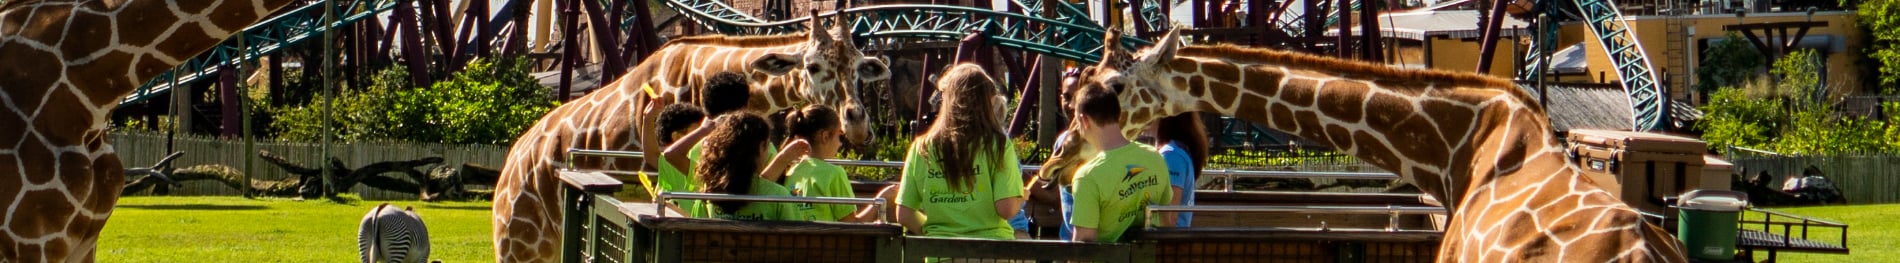 Overnight camps at Busch Gardens Tampa Bay.